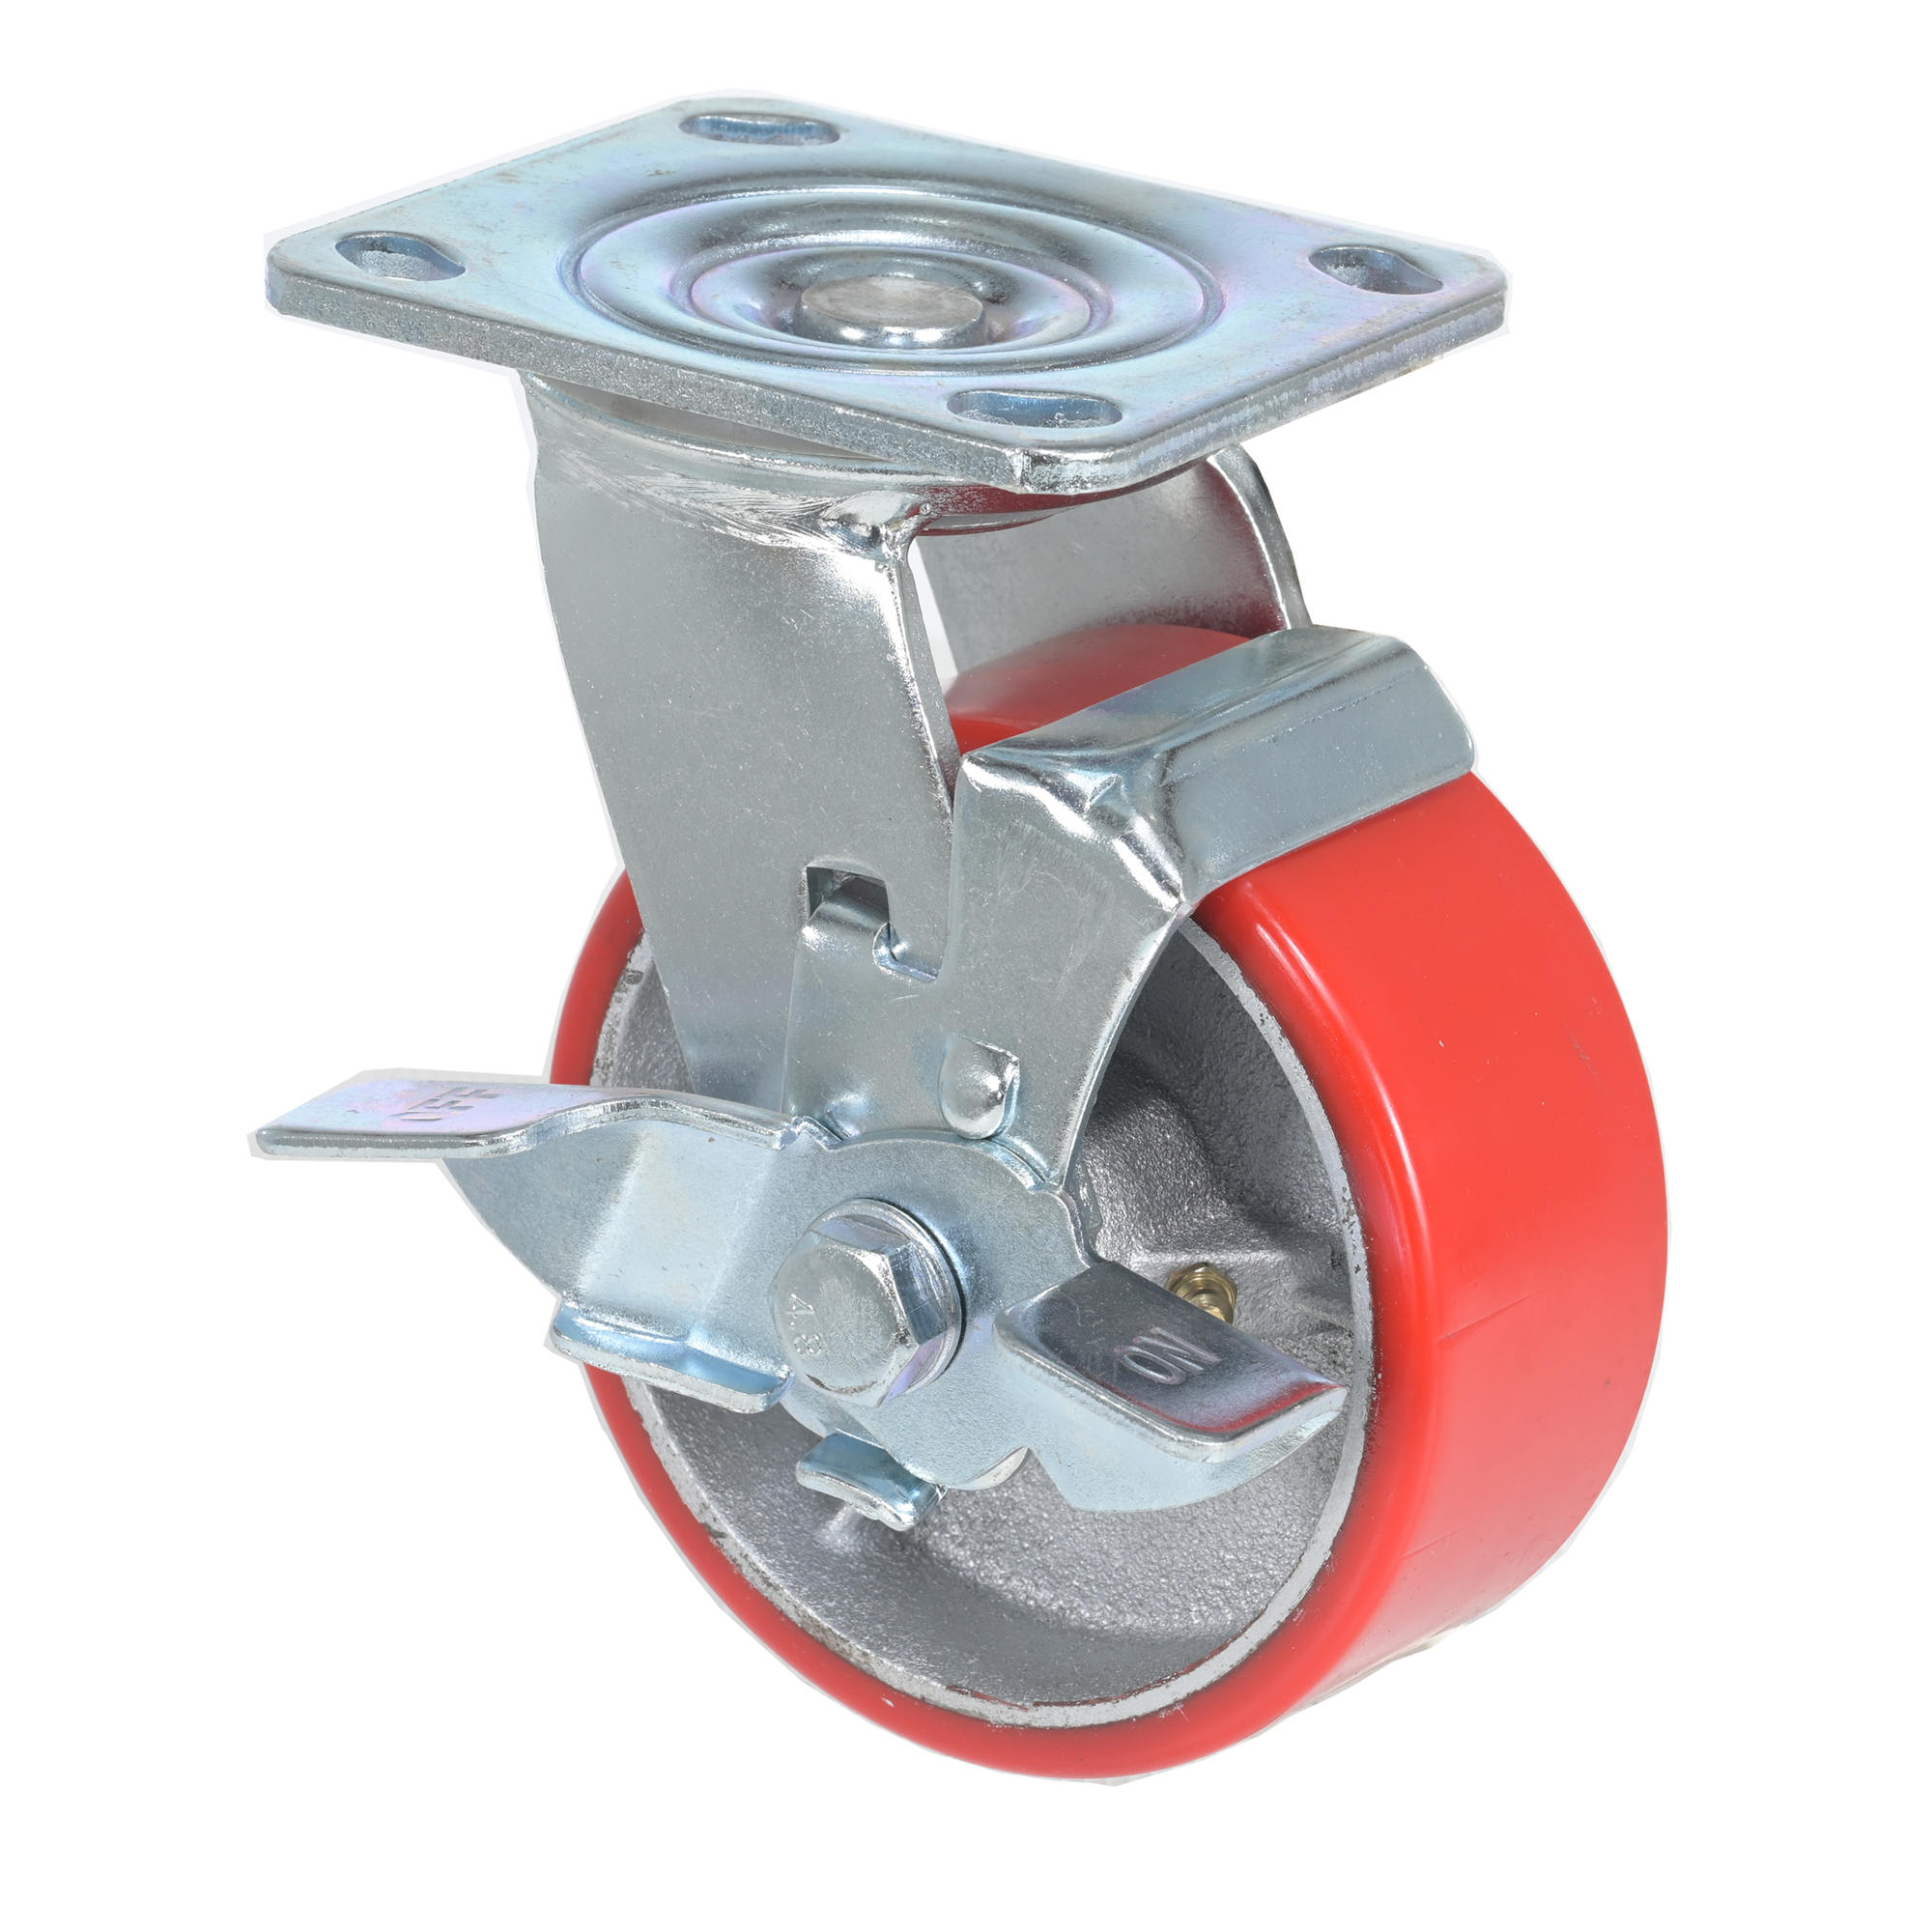 Vestil, Poly swivel with brake caster red, Wheel Diameter 5 in, Package (qty.) 1 Model CST-PU-5X2-S-BR